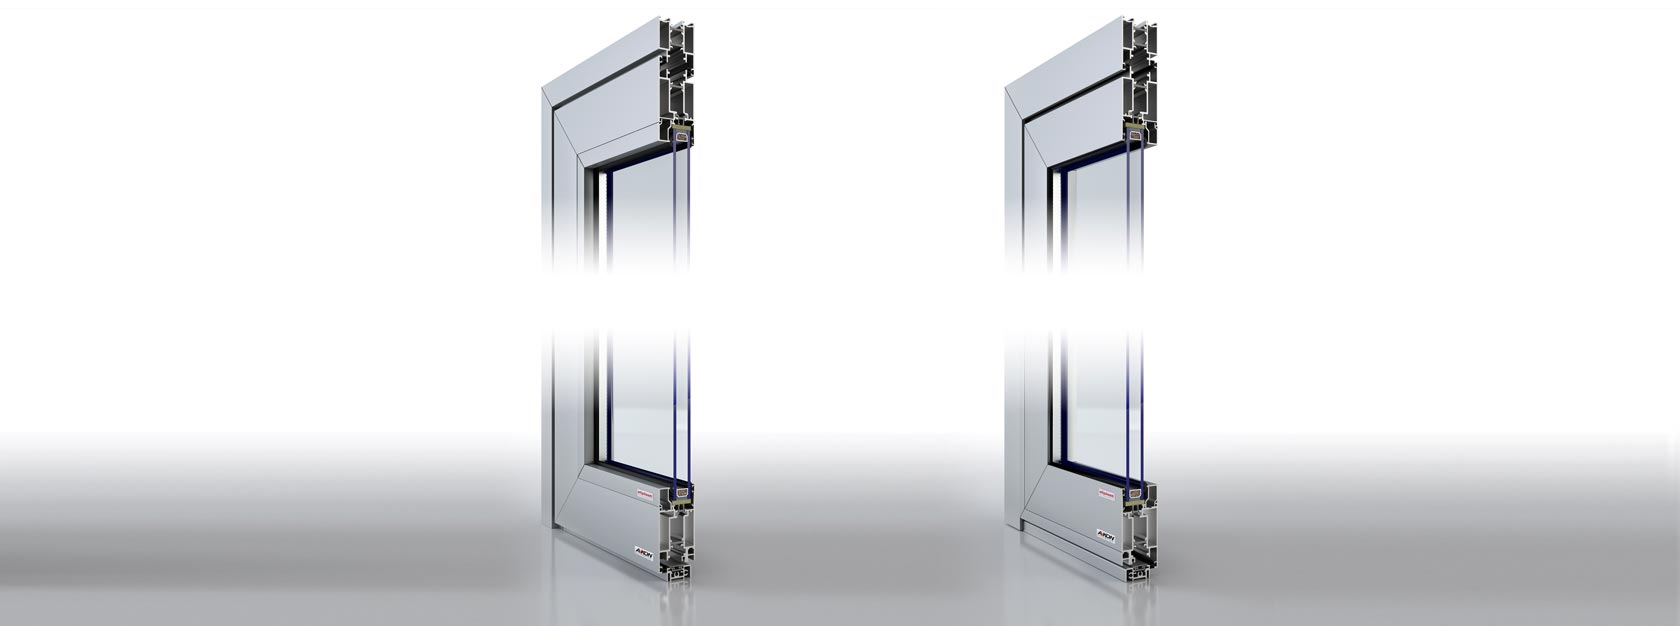 Aluminum door with single or double glass panes